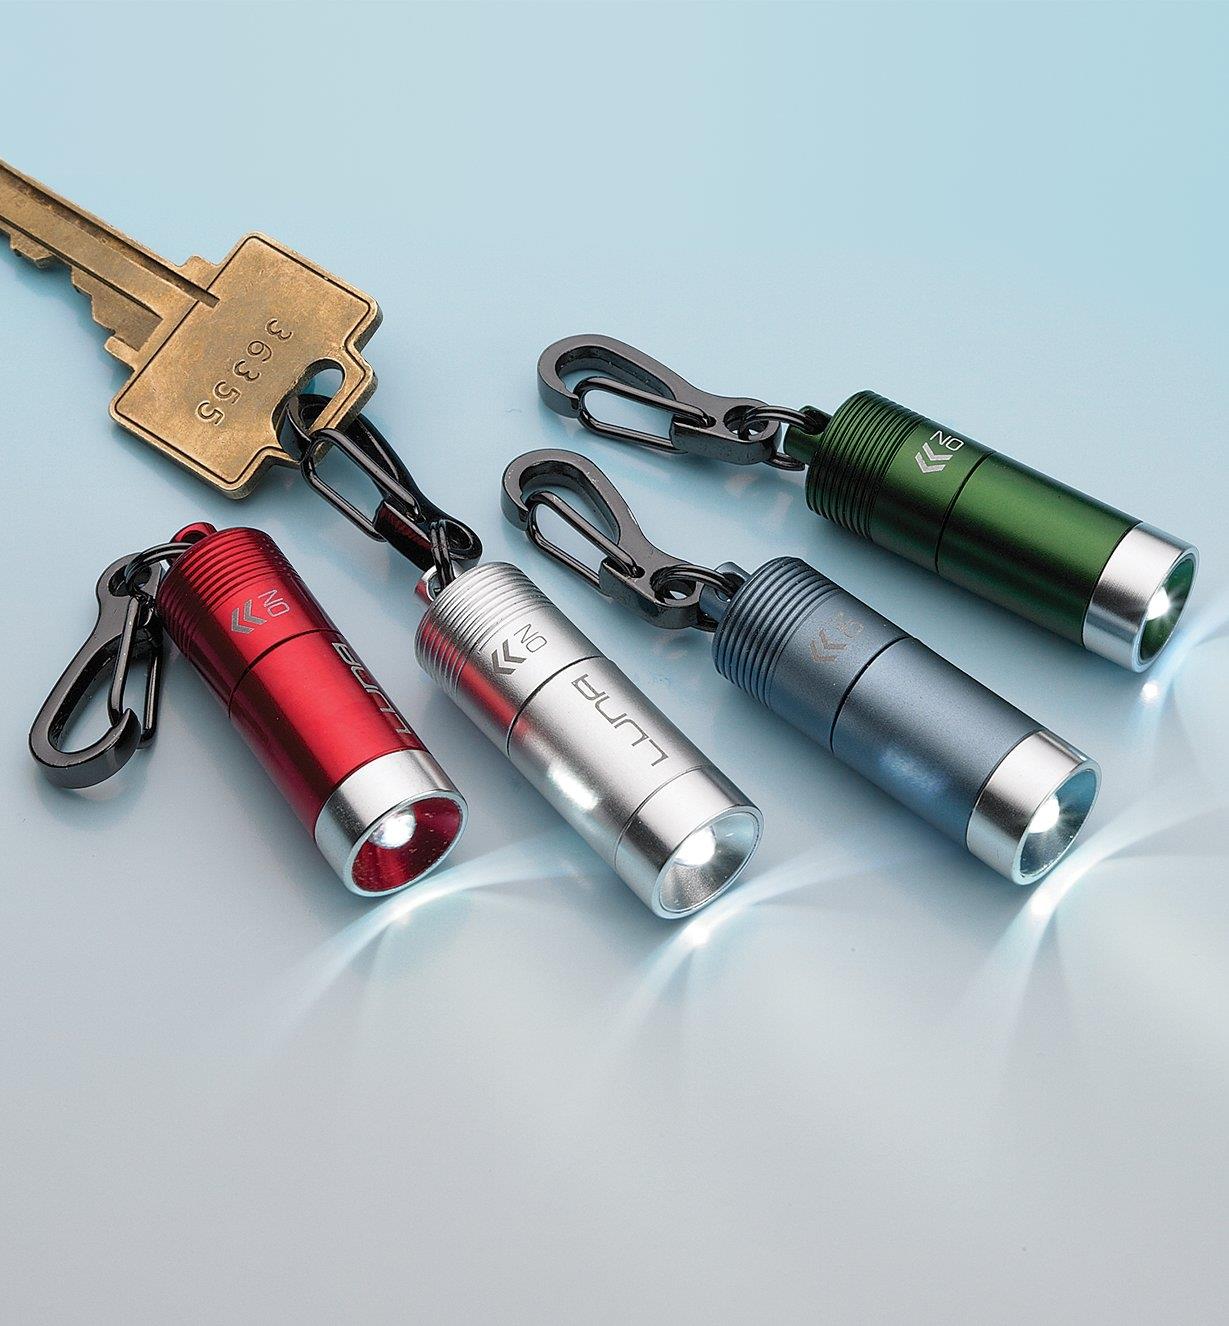 Four mini clip LED lights in different colors, with one attached to a key